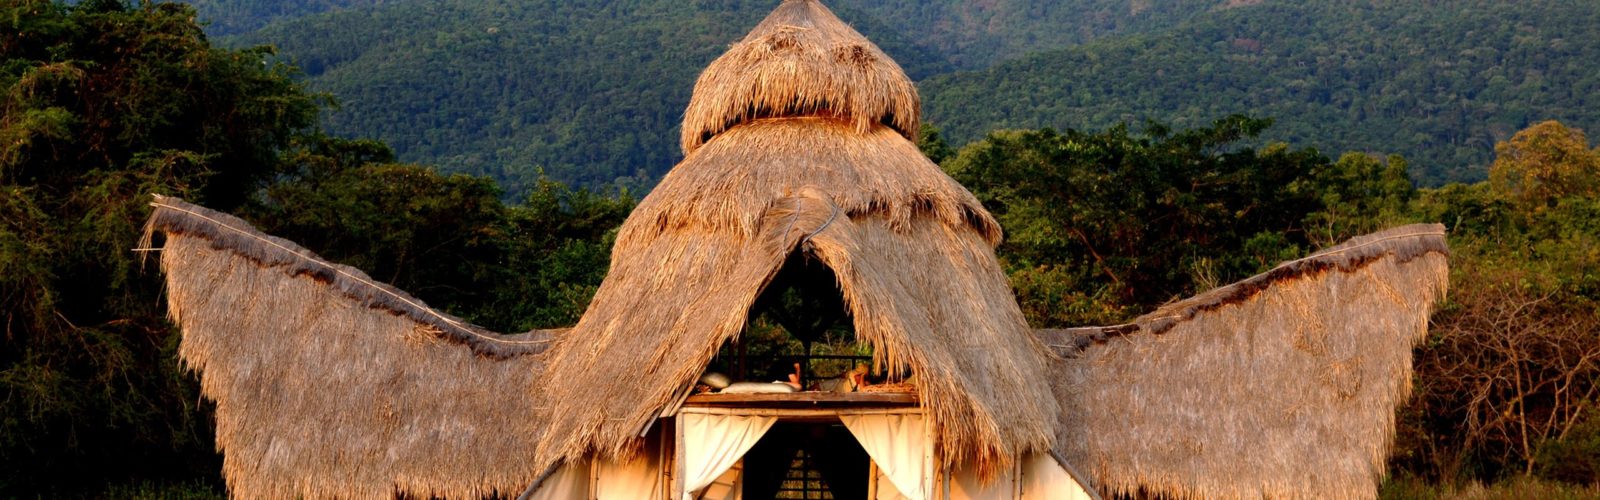 Exterior of Greystoke Mahale constructed of recycled dhows and thatched palm leaf roof set in front of the Mahale Mountains, Tanzania